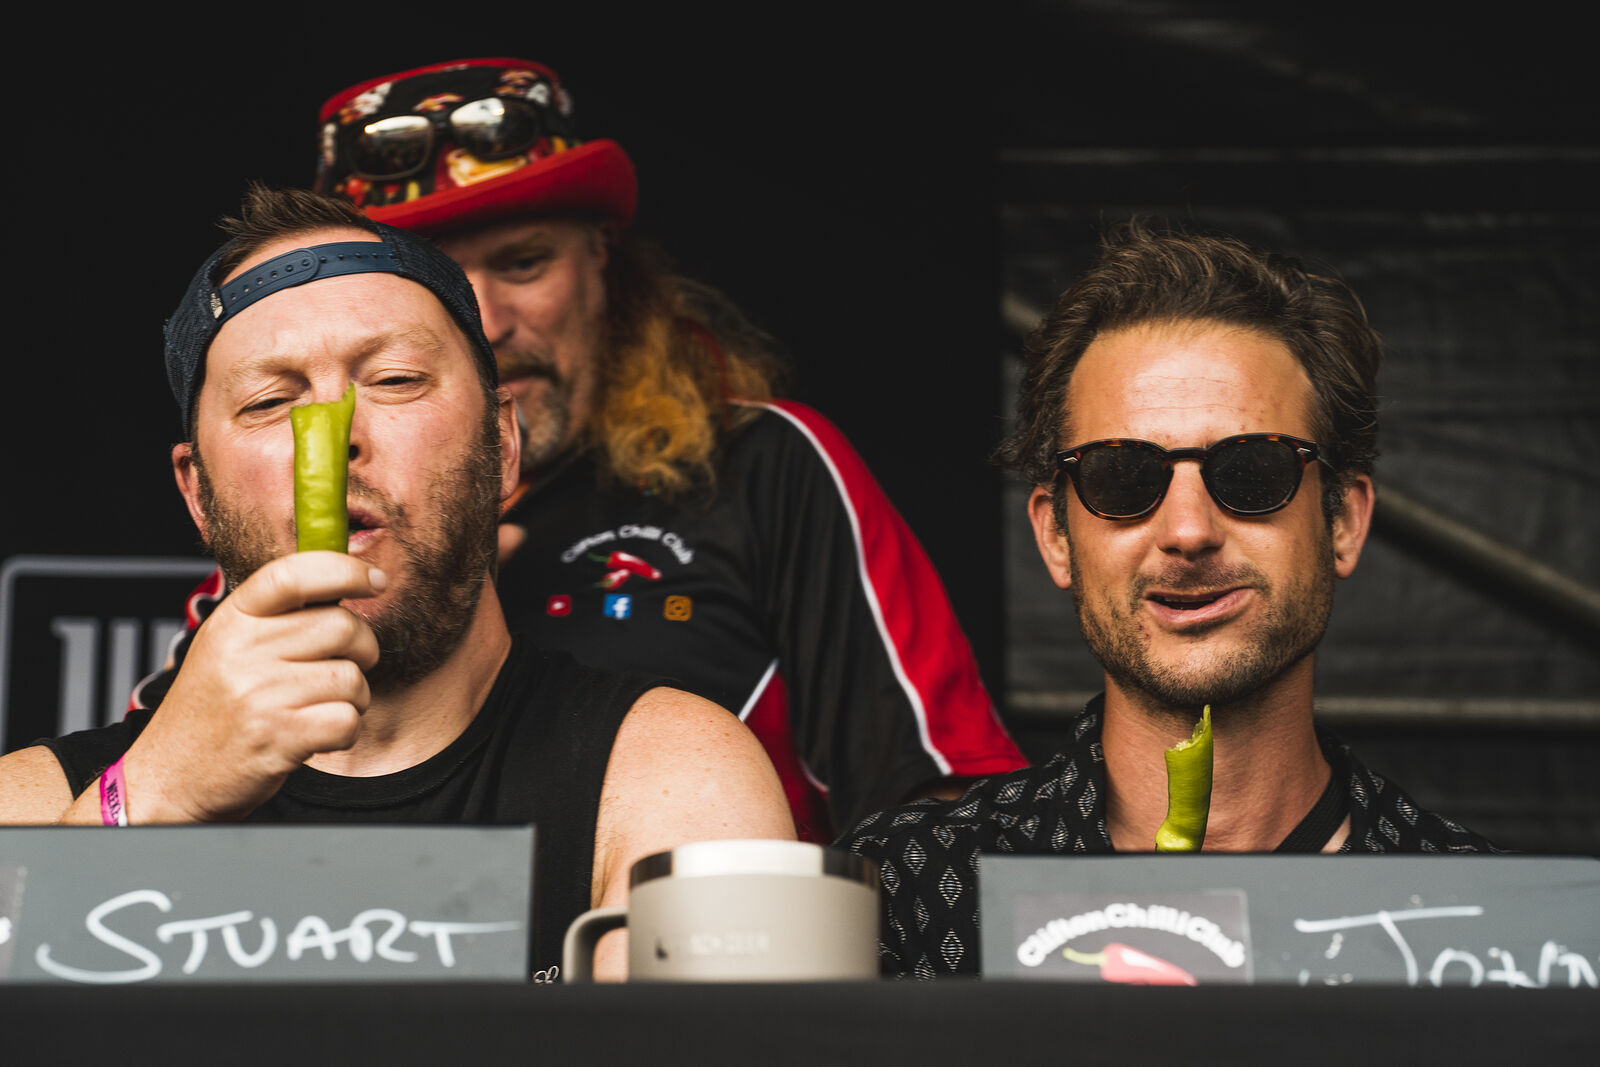 Chilli Eating Competition